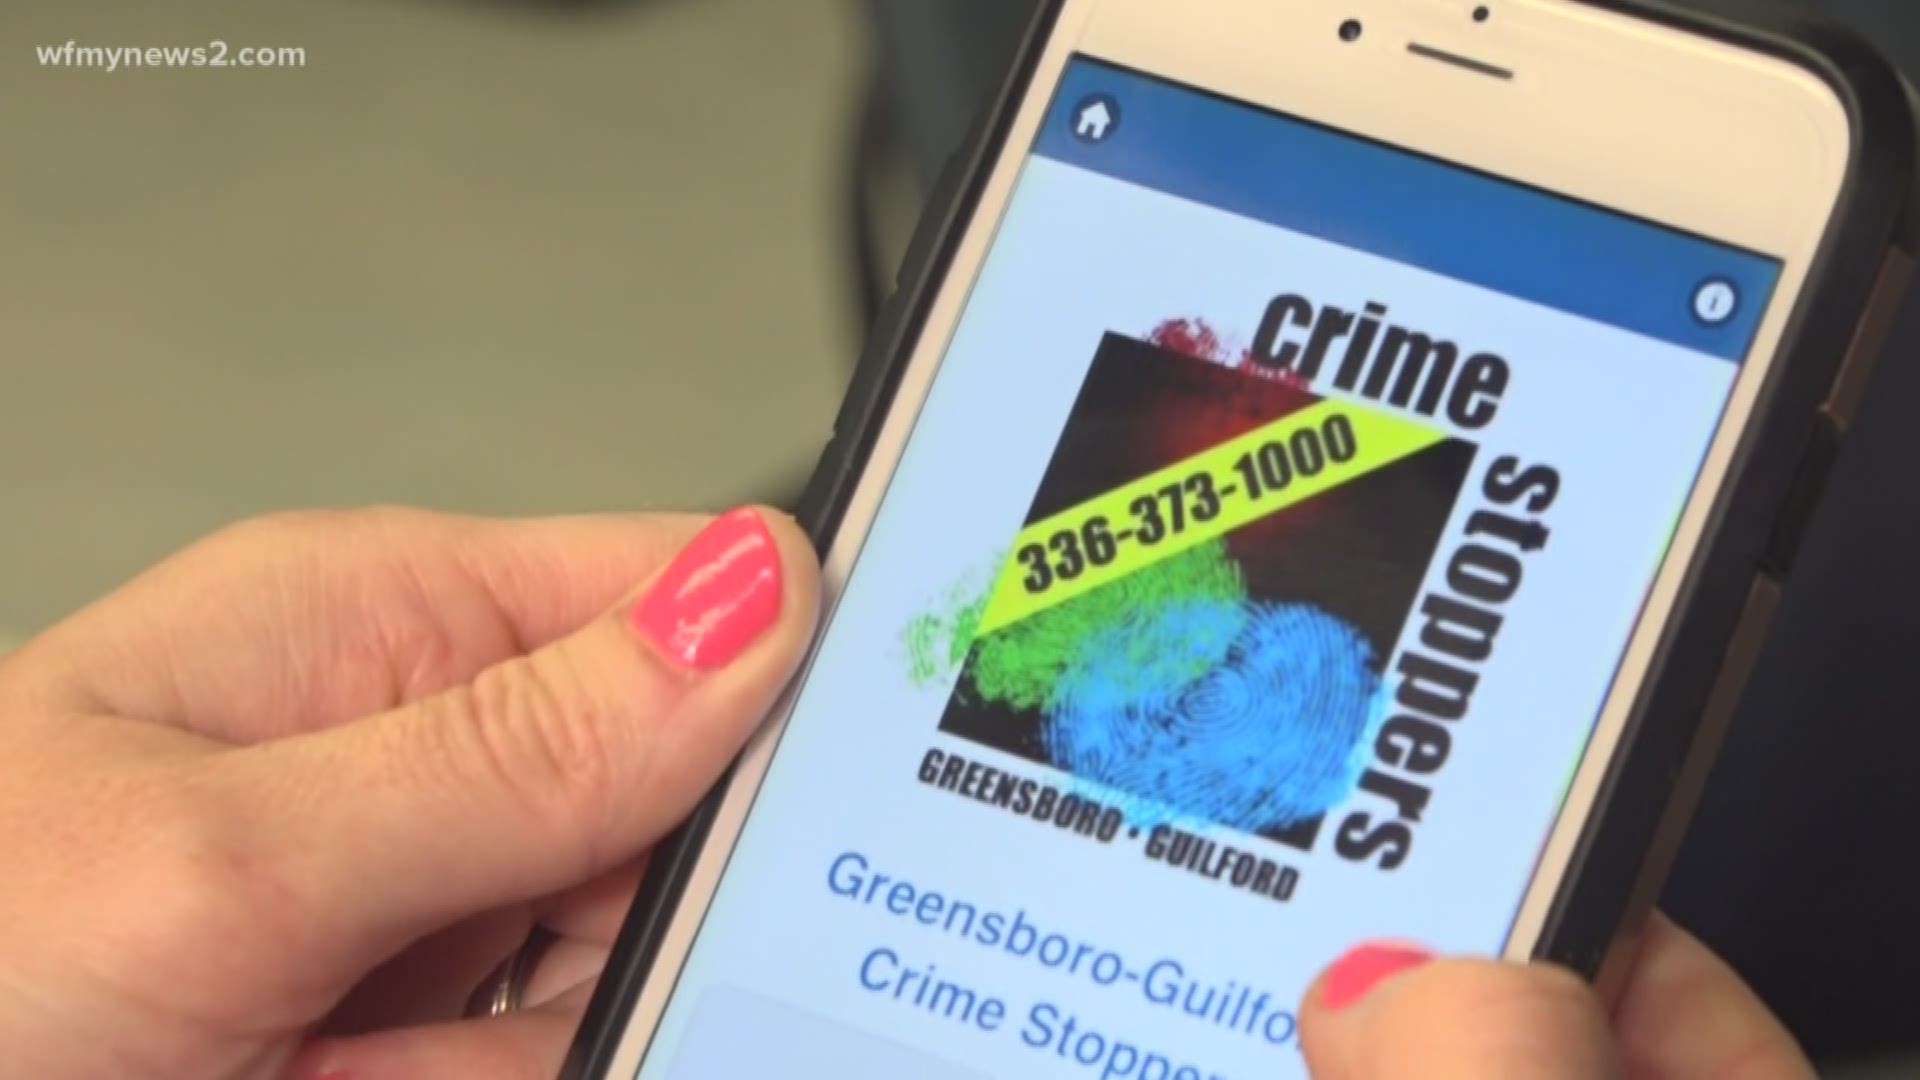 Tipsters can send criminal information anonymously and have a two-way chat with a Crime Stoppers administrator.